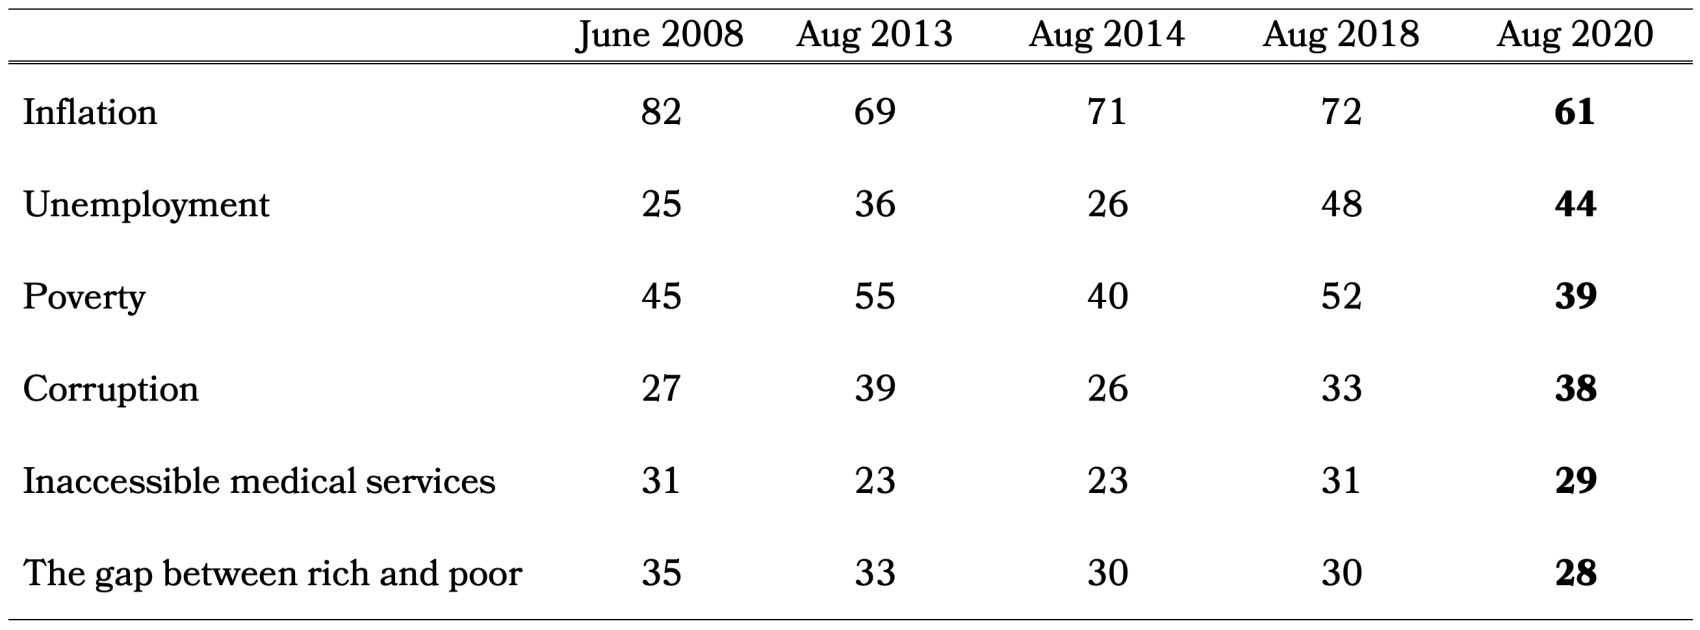 Table showing most disturbing problems for Russians (by percentage) for June 2008, August 2013, August 2014, August 2018, and August 2020. Inflation (81, 69, 71, 72, 61%), Unemployment (25, 36, 26, 48, 44%), Poverty (45, 55, 40, 52, 39%), Corruption (27, 39, 26, 33, 38%), Inaccessible medical services (31, 23, 23, 31, 29%), and the Gap between rich and poor (35, 33, 30, 30, 28%).